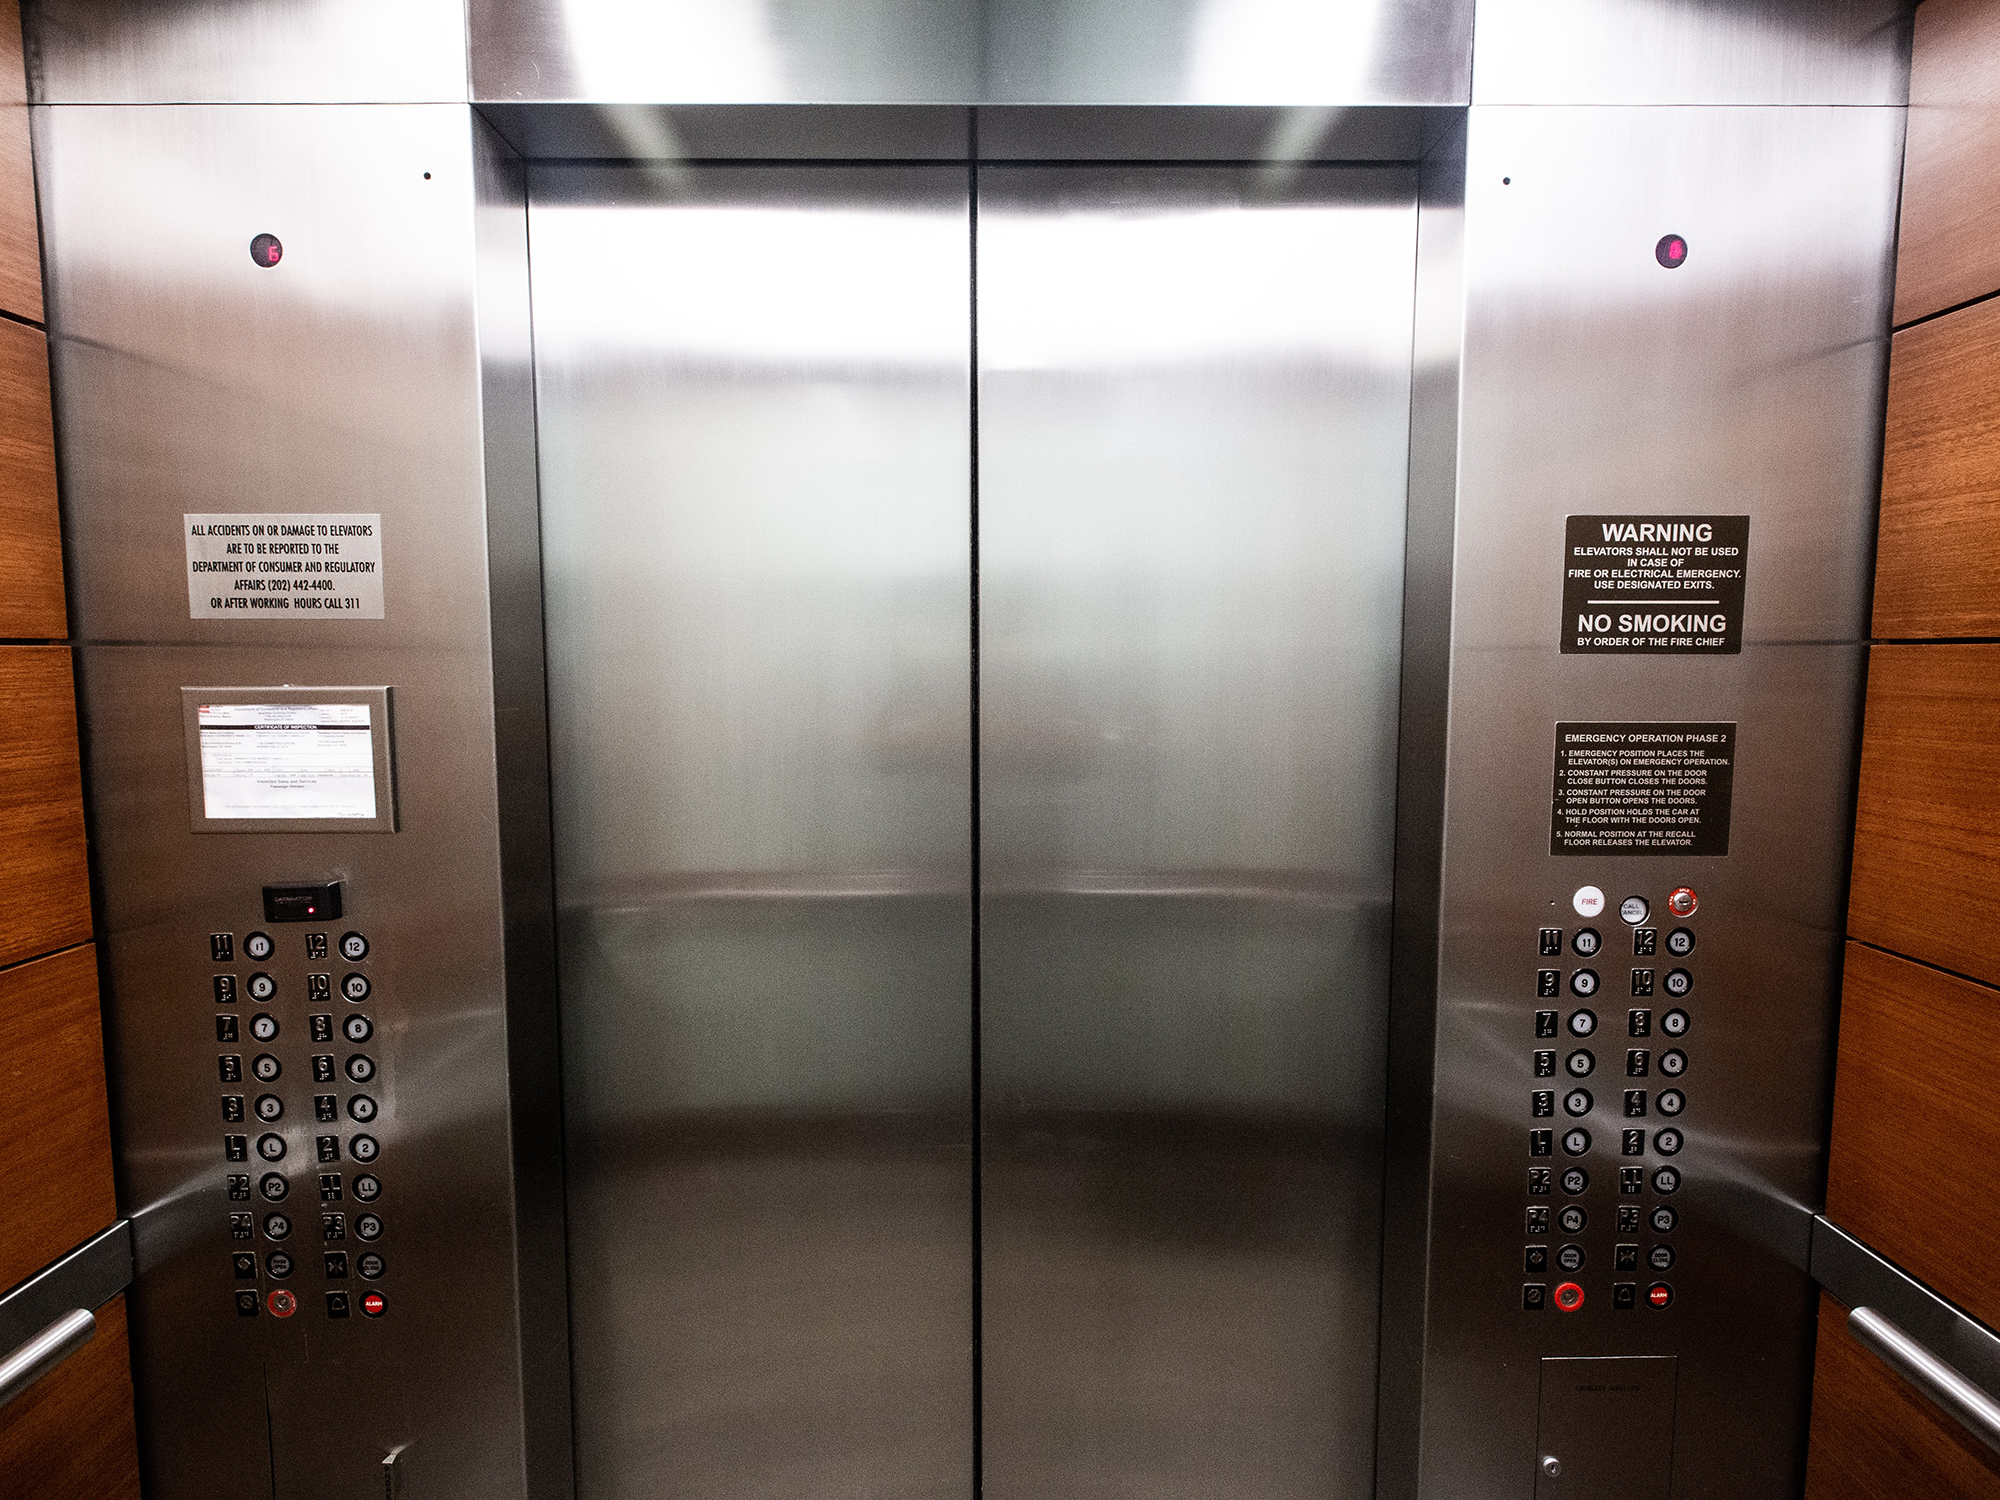 Lift door in the center and all buttons on left and right side of the lift door.